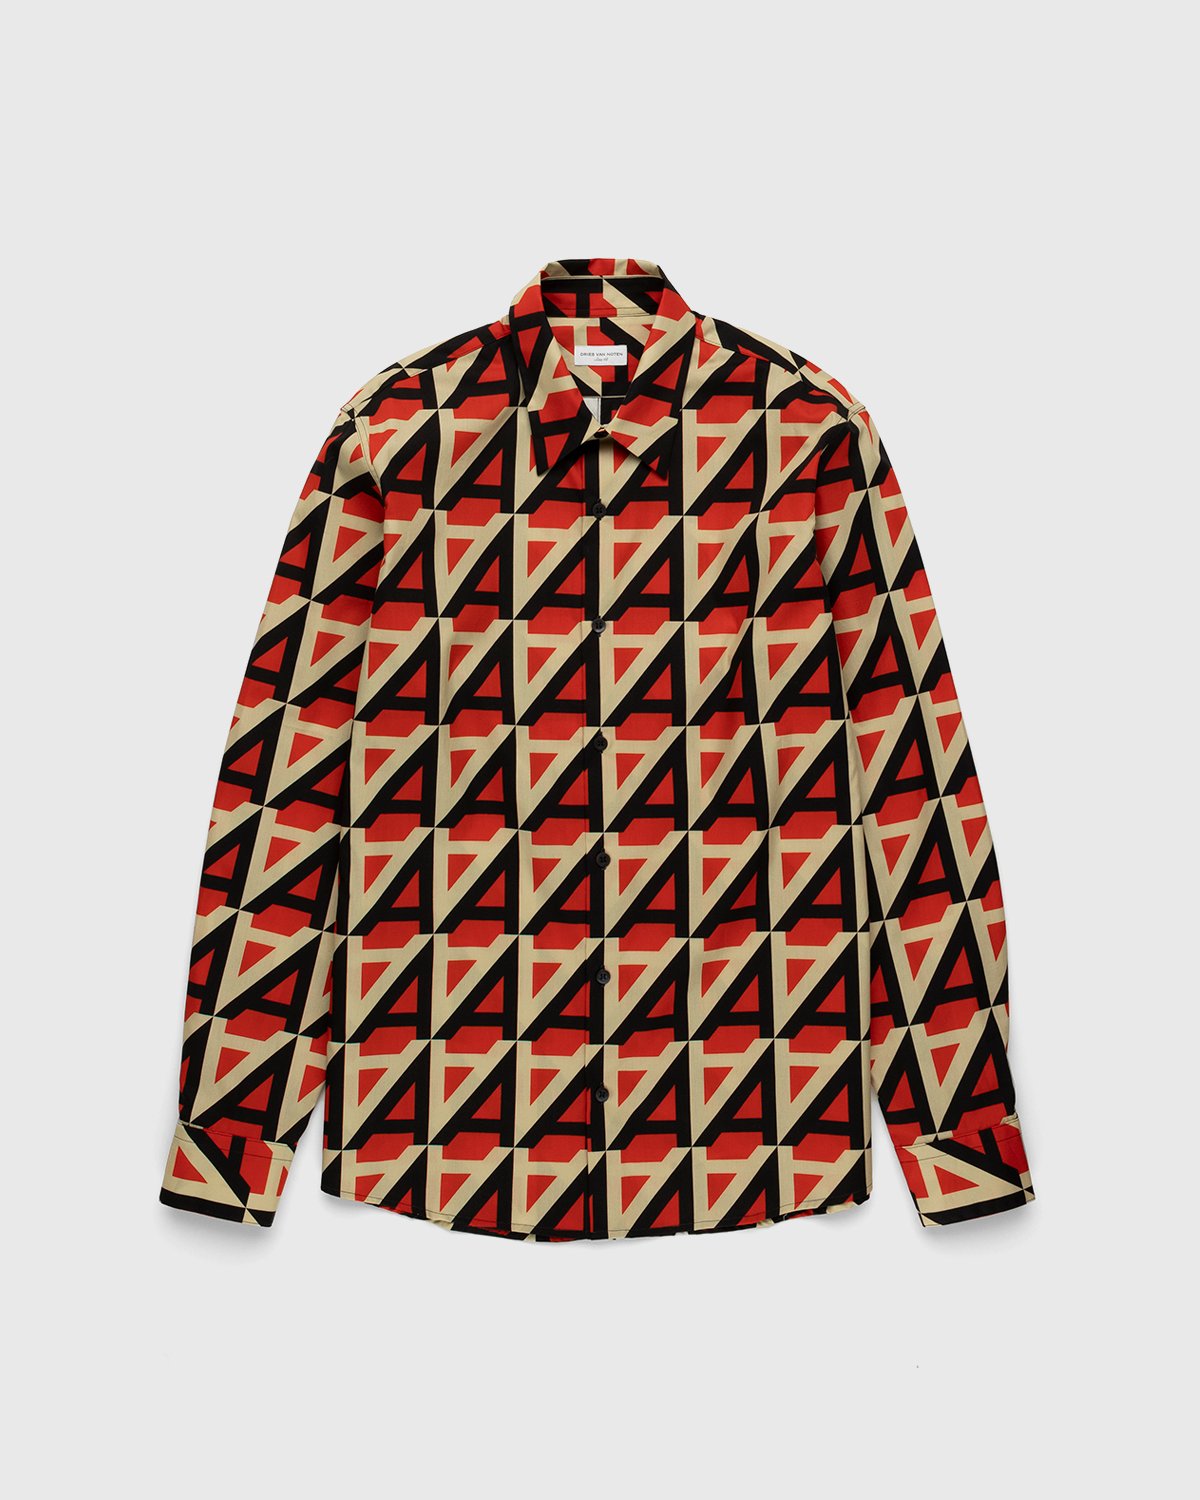 Dries van Noten - Curle "A" Shirt Red - Clothing - Red - Image 1